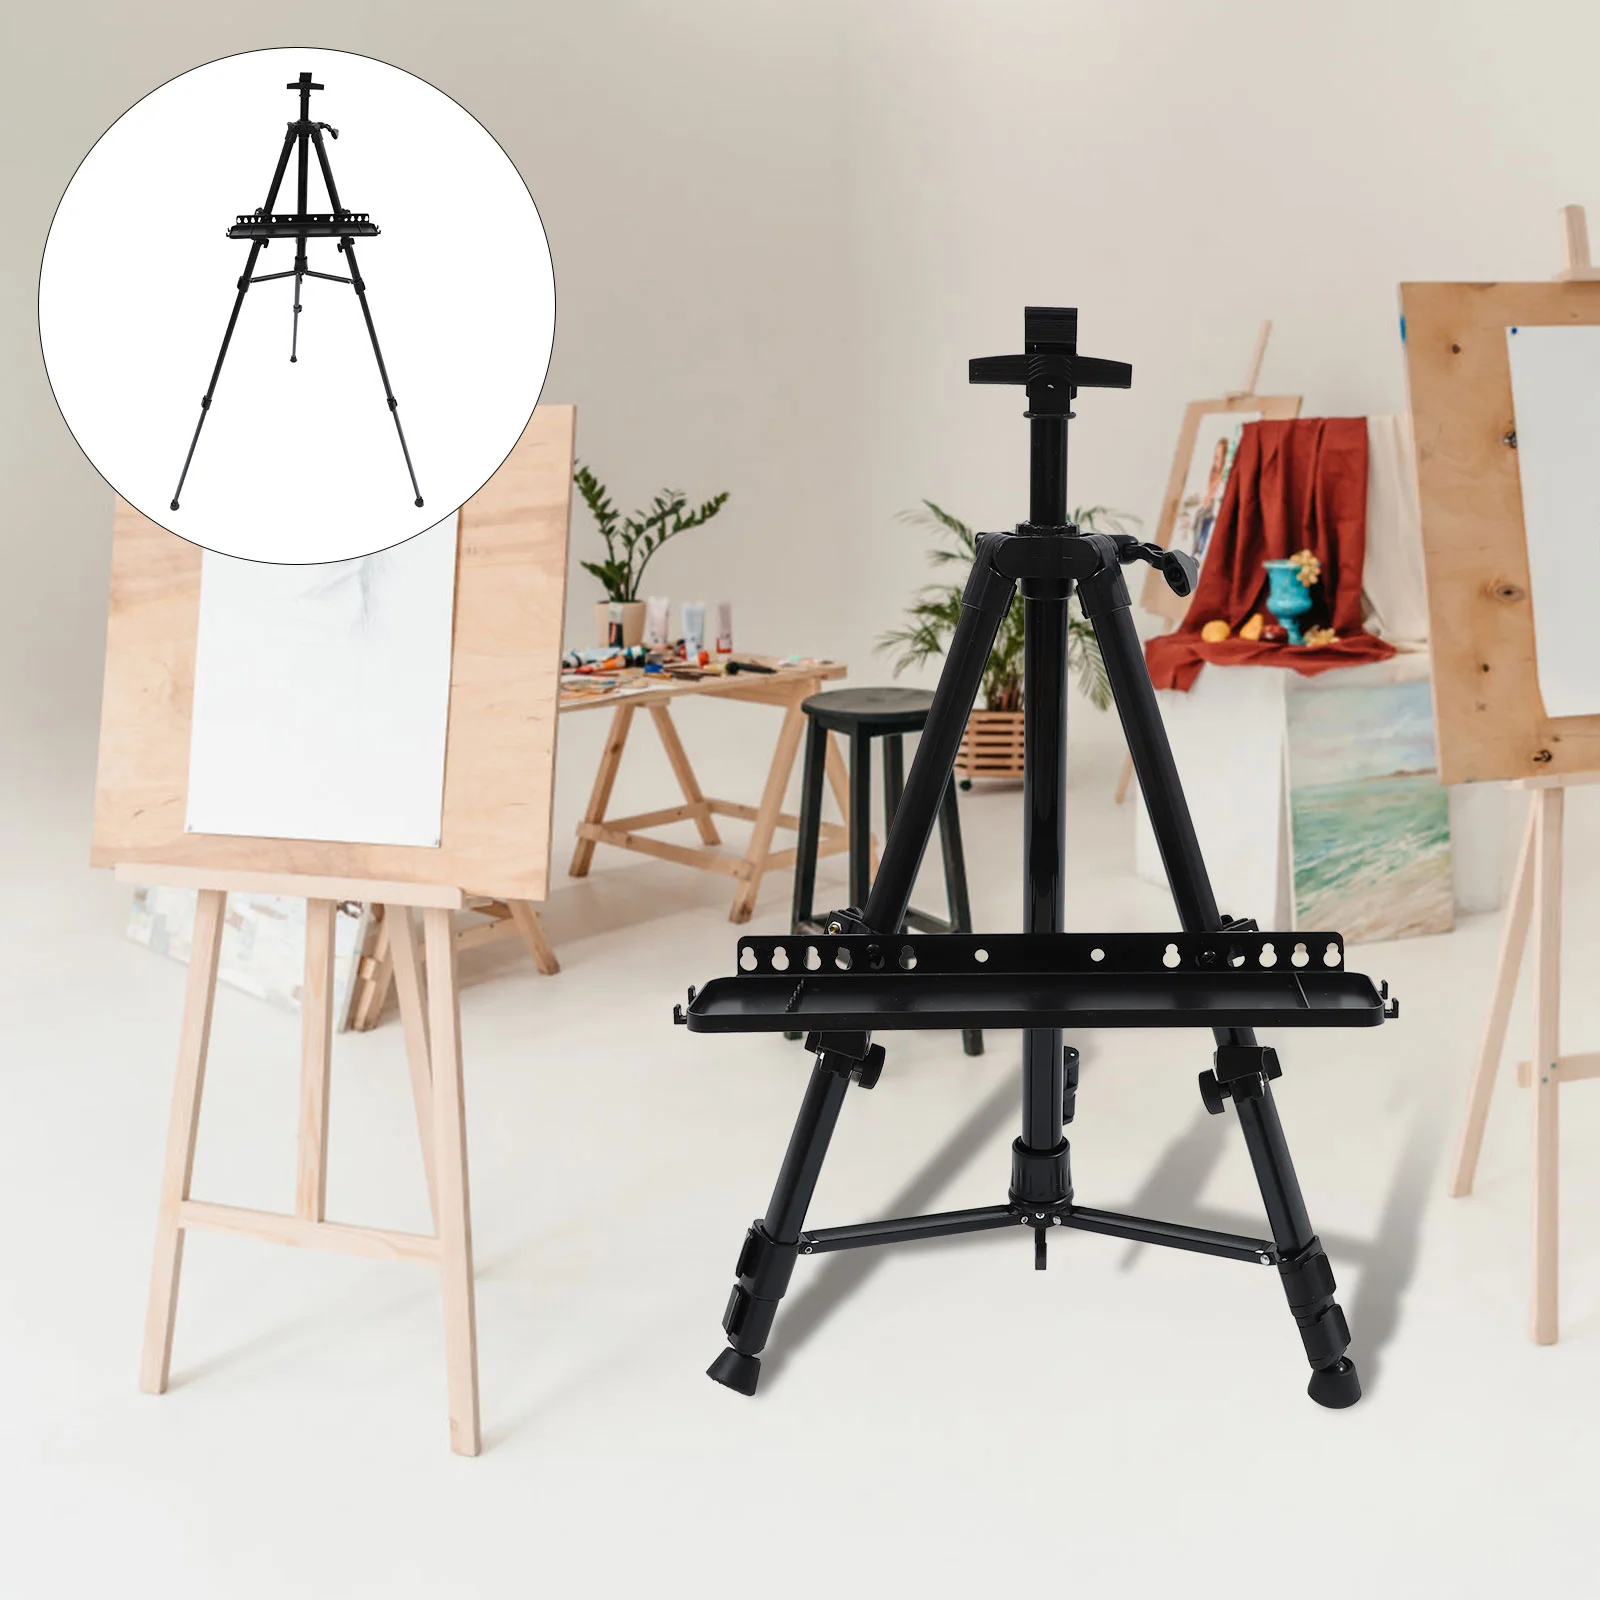 Folding Easel Drawing Board Adjustable Height Tabletop Painting Stand Tray Desktop Tripod Sketching Display Rack Outdoors